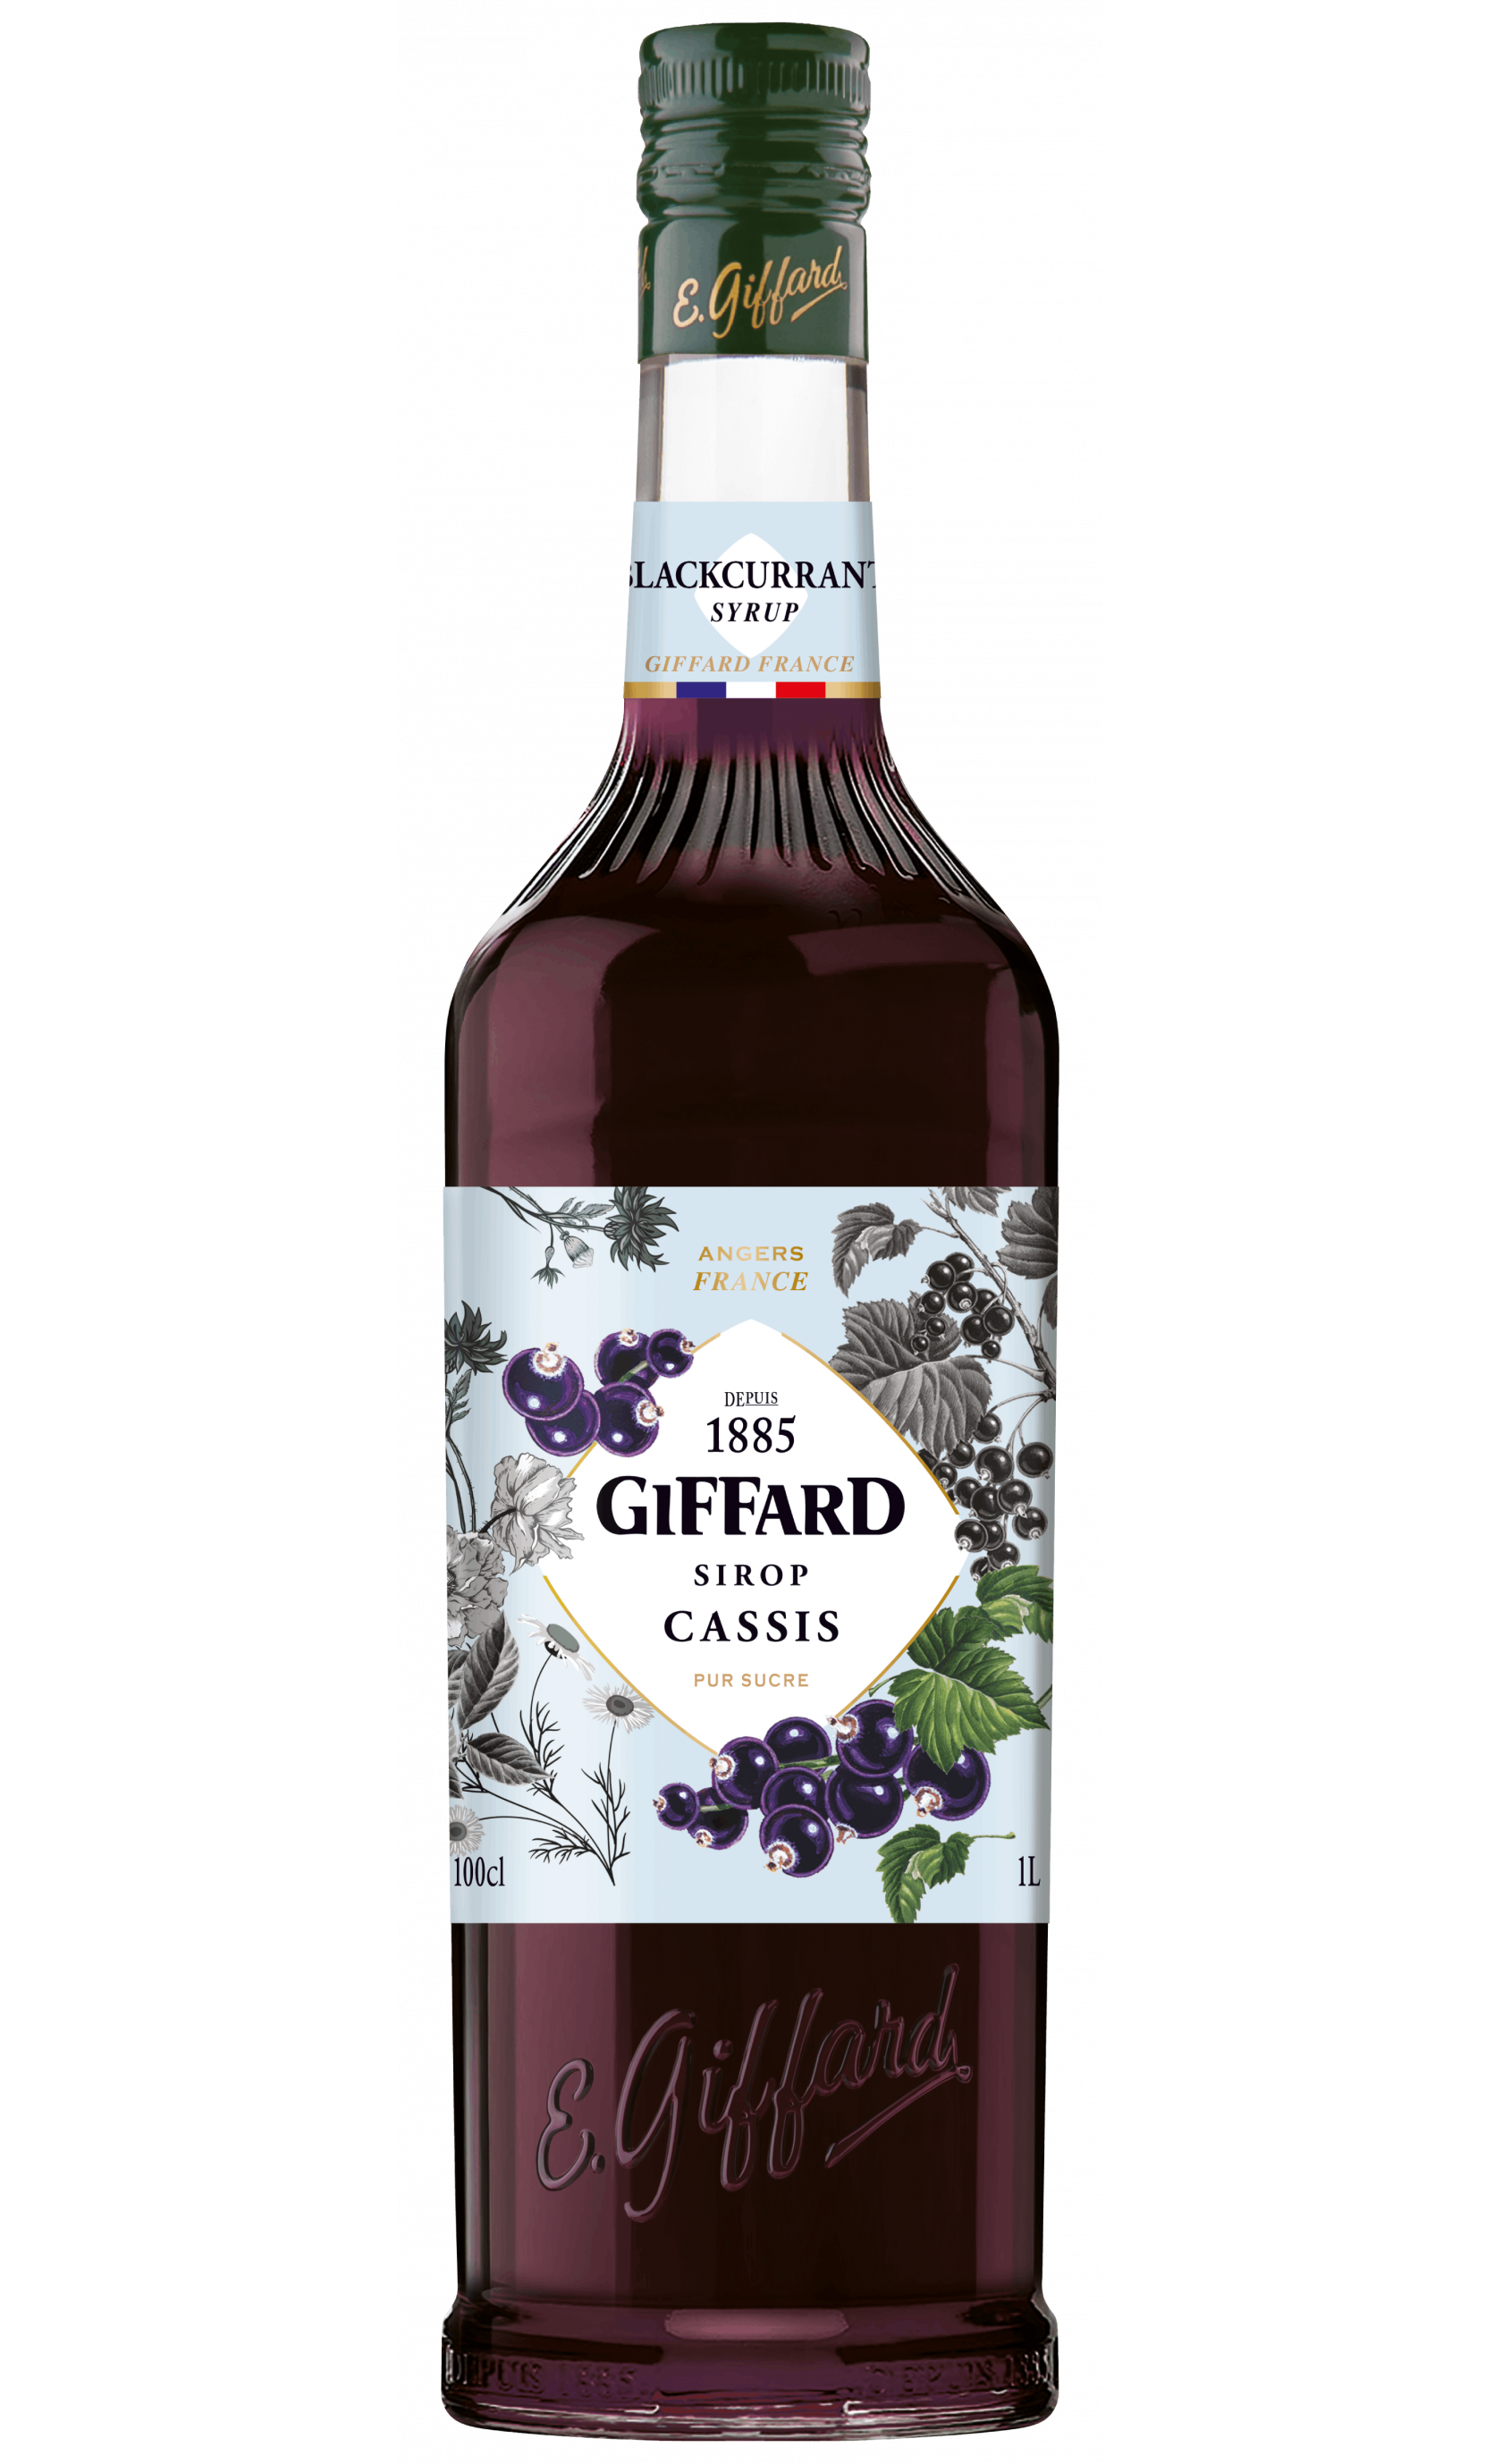 Cassis Sirup